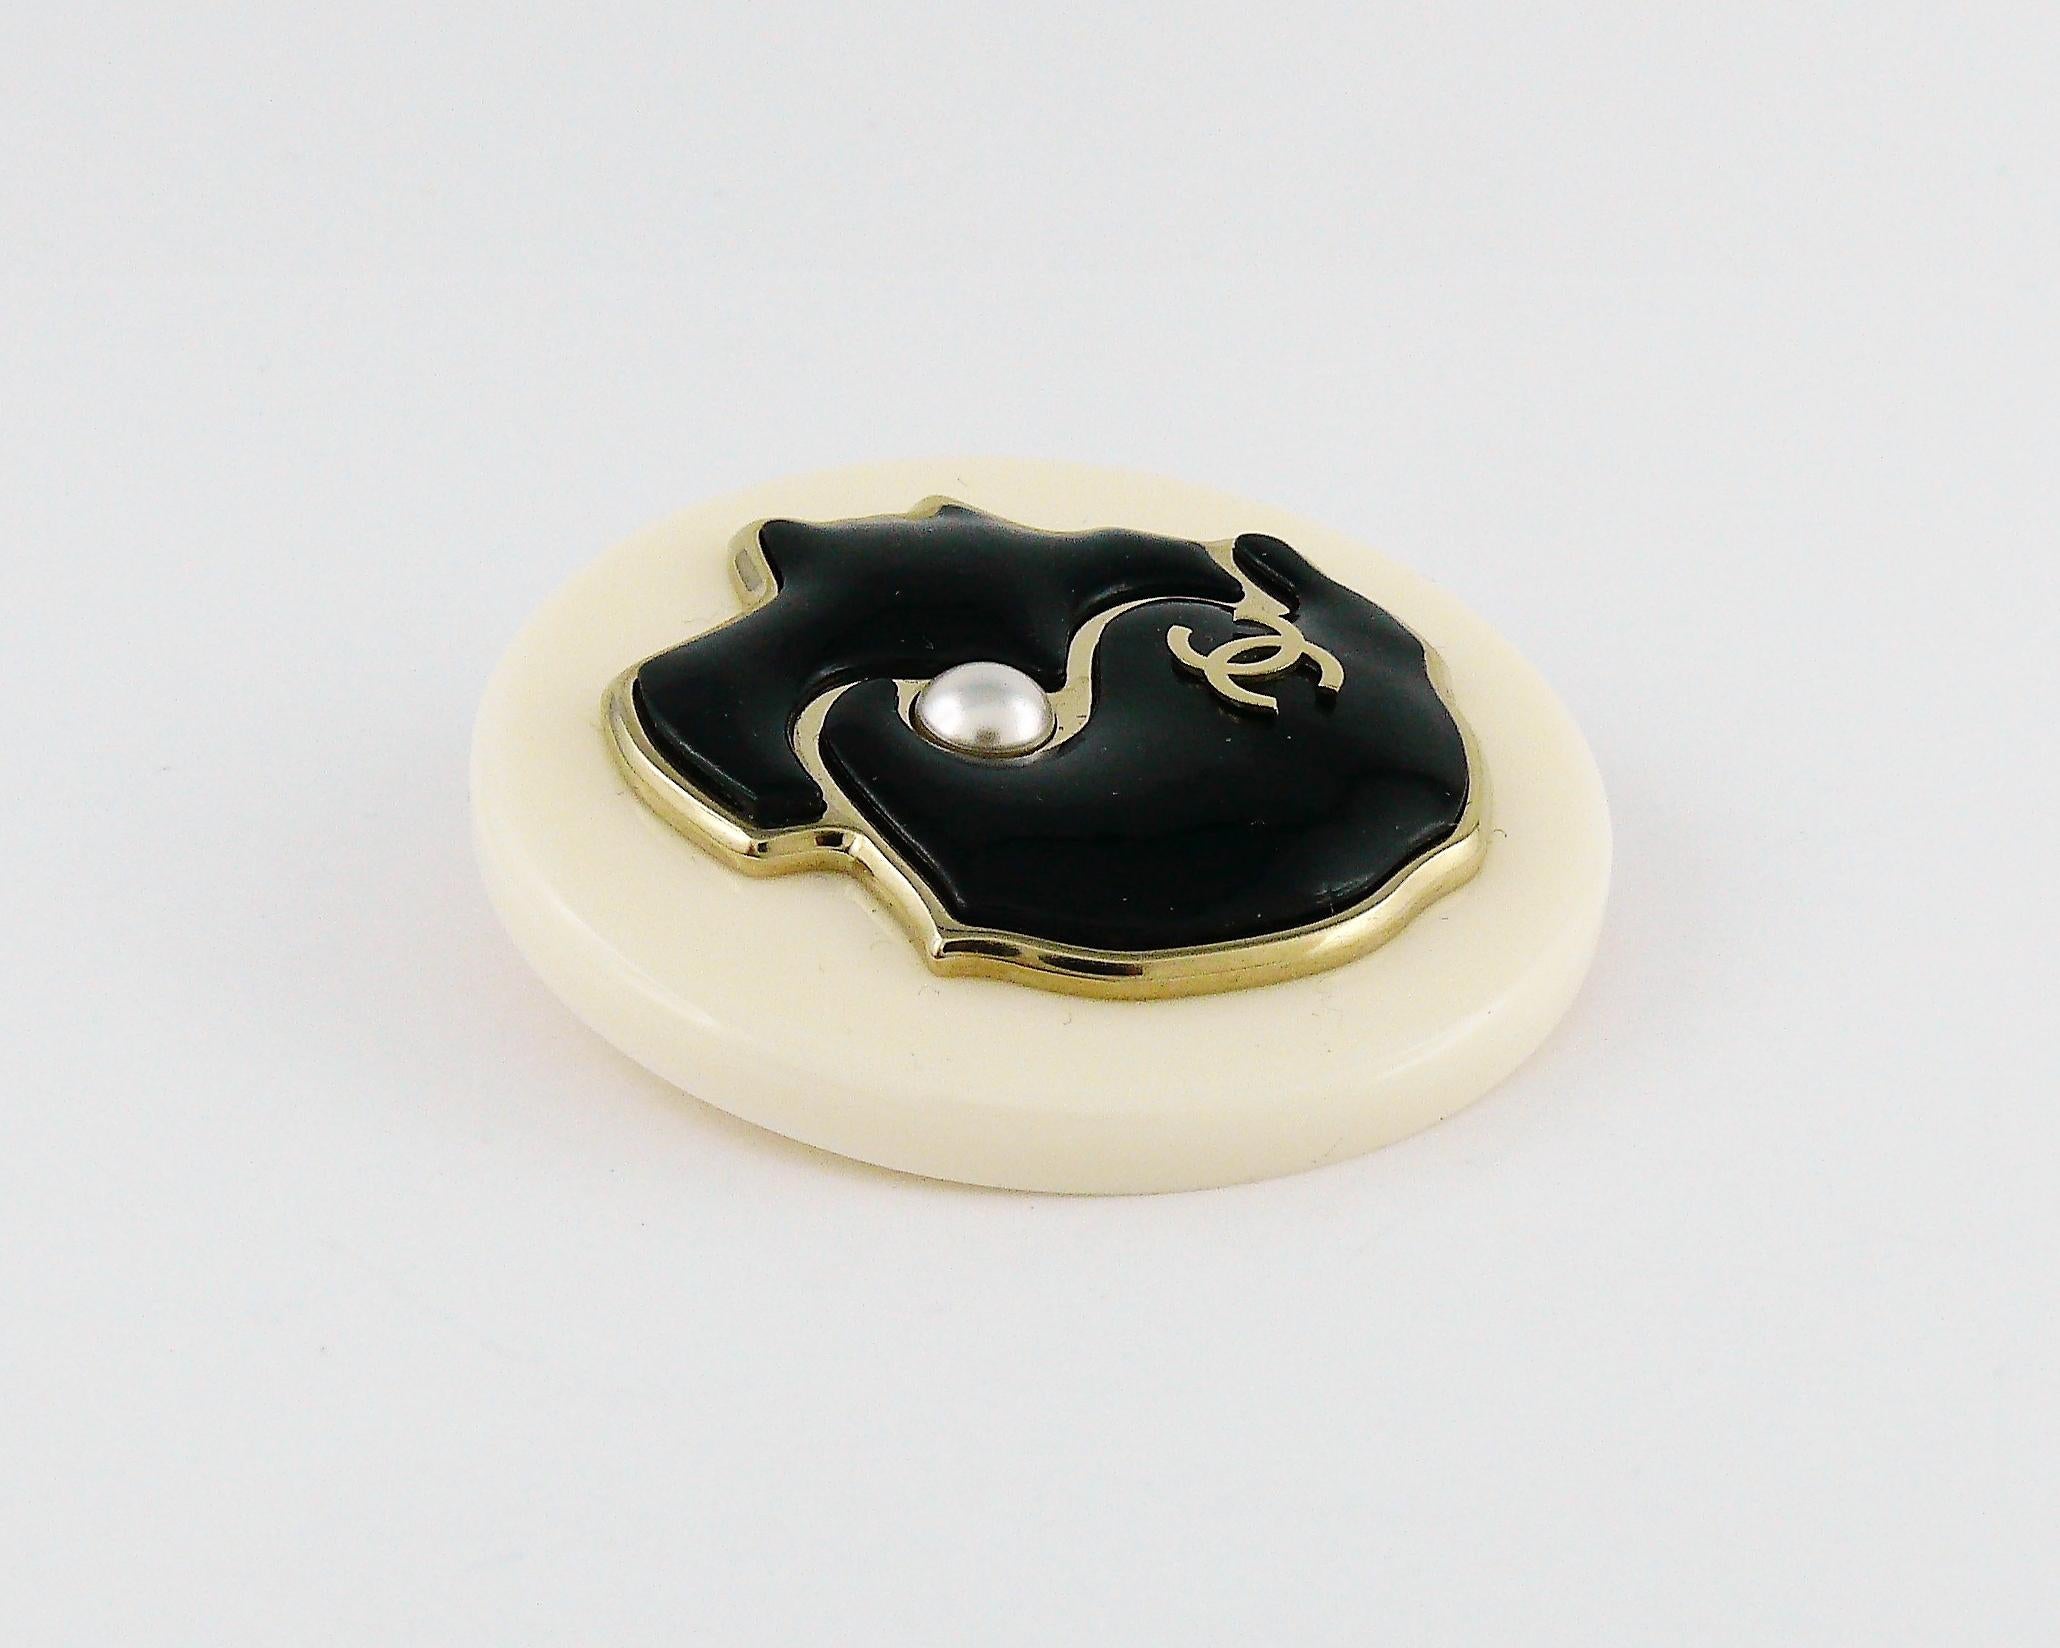 CHANEL black and white resin COCO profile brooch embellished with a faux pearl and silver toned CC logo.

Marked CHANEL G18 B Made in Italy.

Indicative measurements : diameter approx. 4.9 cm (1.93 inches).

Comes with original box.

JEWELRY